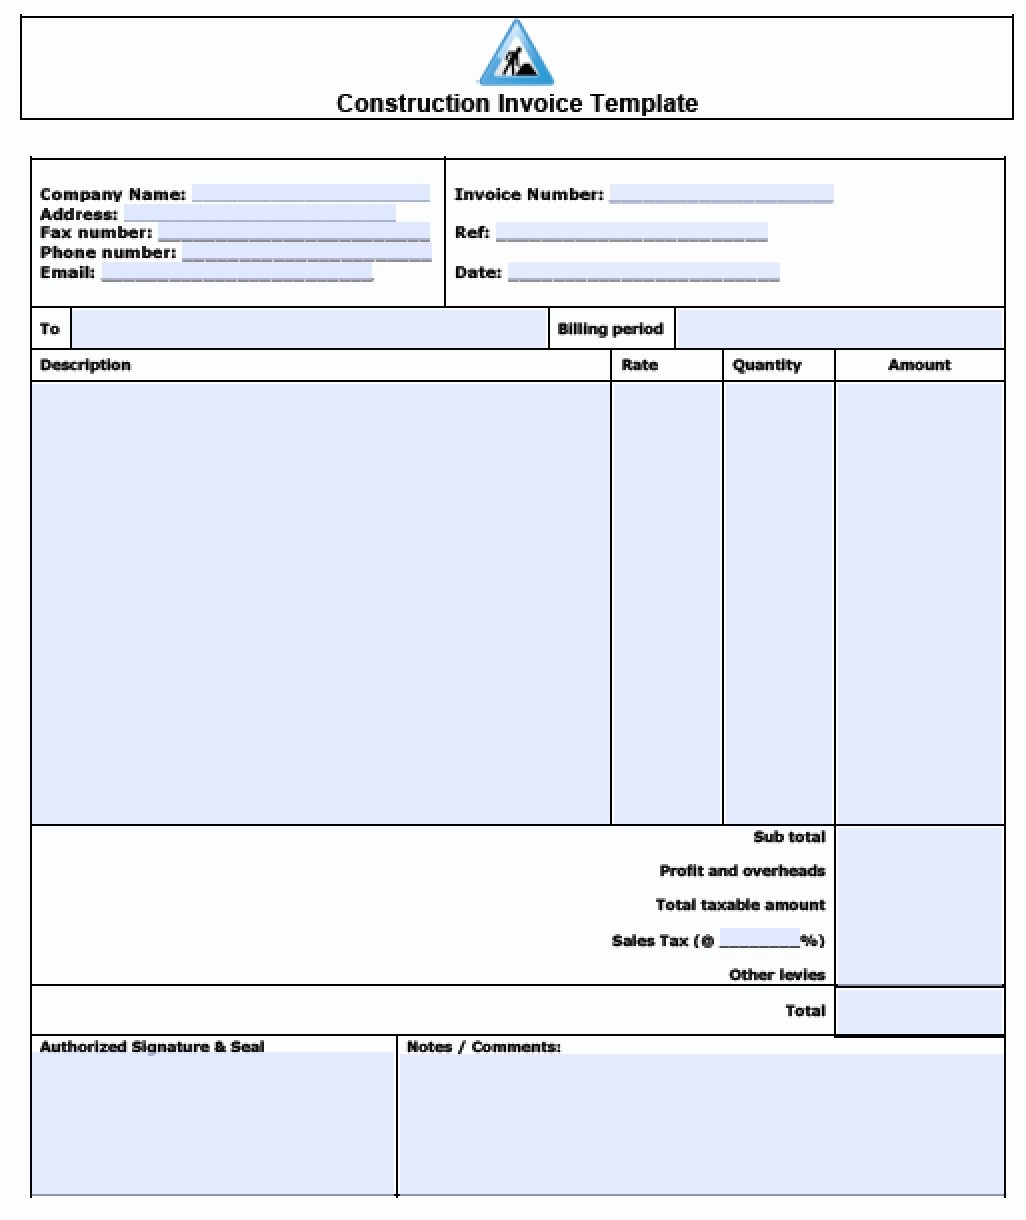 Contractor Invoice Template Excel Beautiful Construction Invoice Template Excel